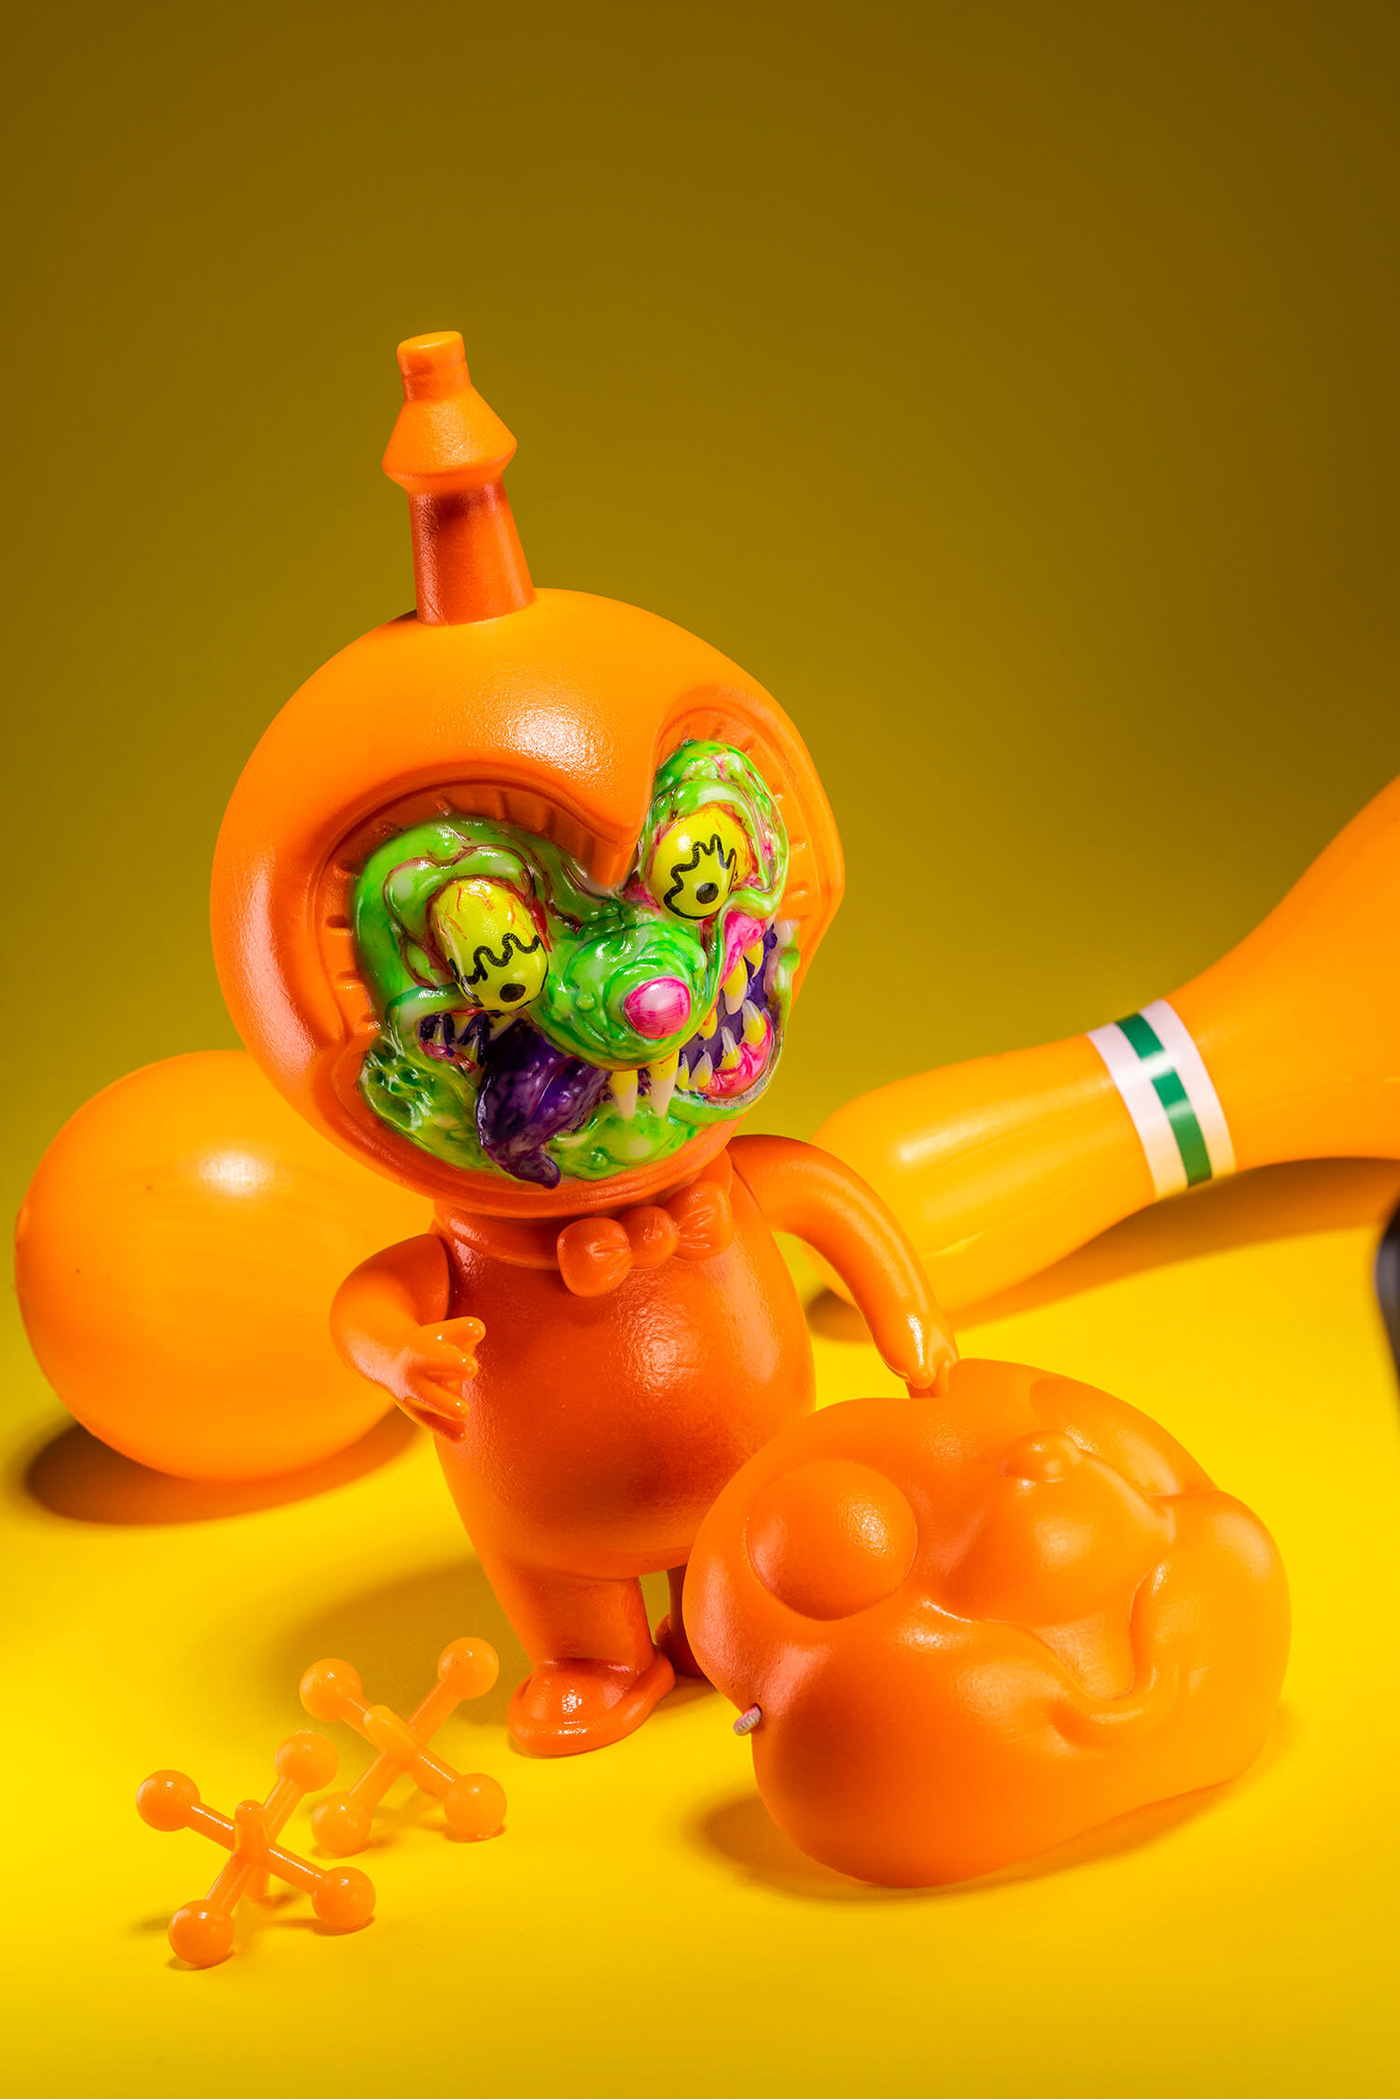 art toy collectible product 3D resin figure lowbrow 3dprint toy